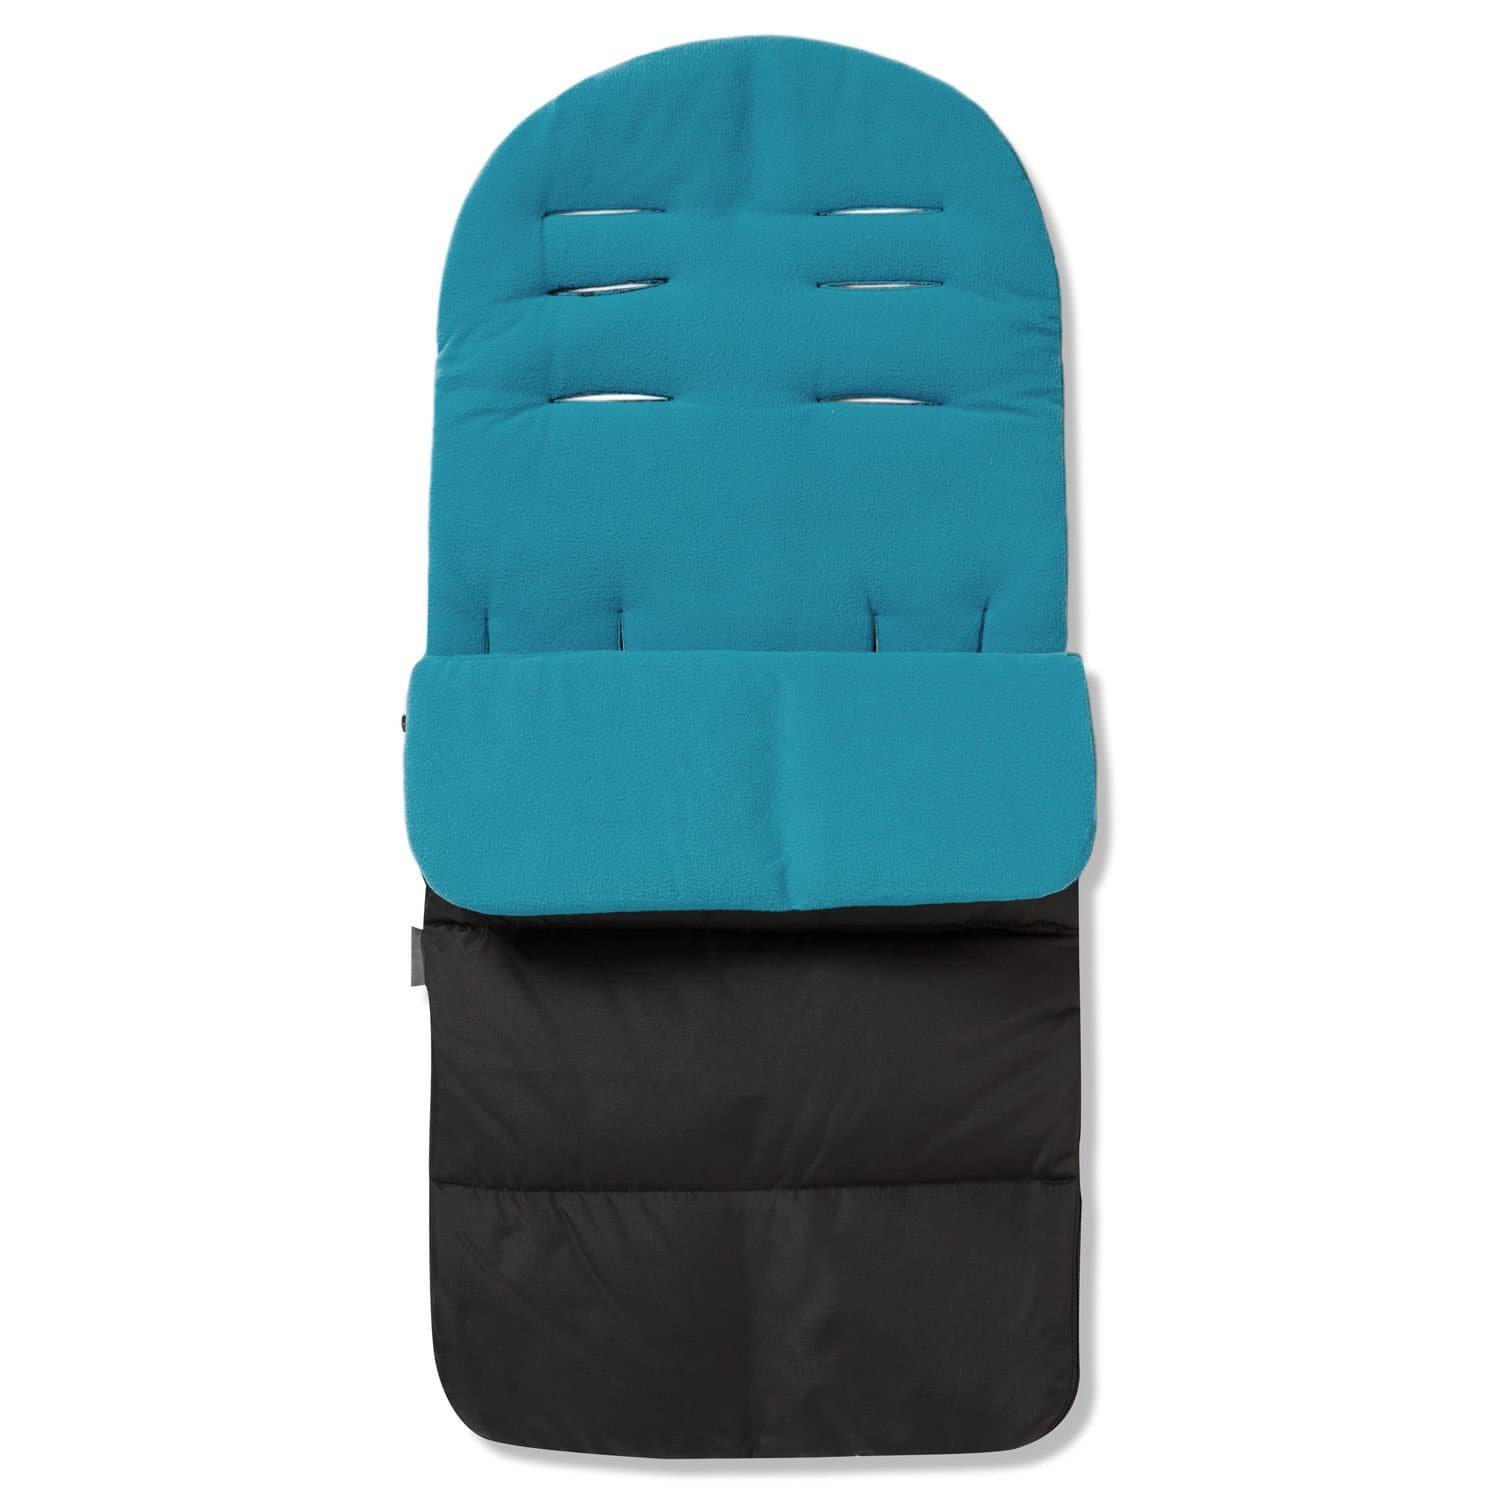 Premium Footmuff / Cosy Toes Compatible with BabySun - Ocean Blue / Fits All Models | For Your Little One